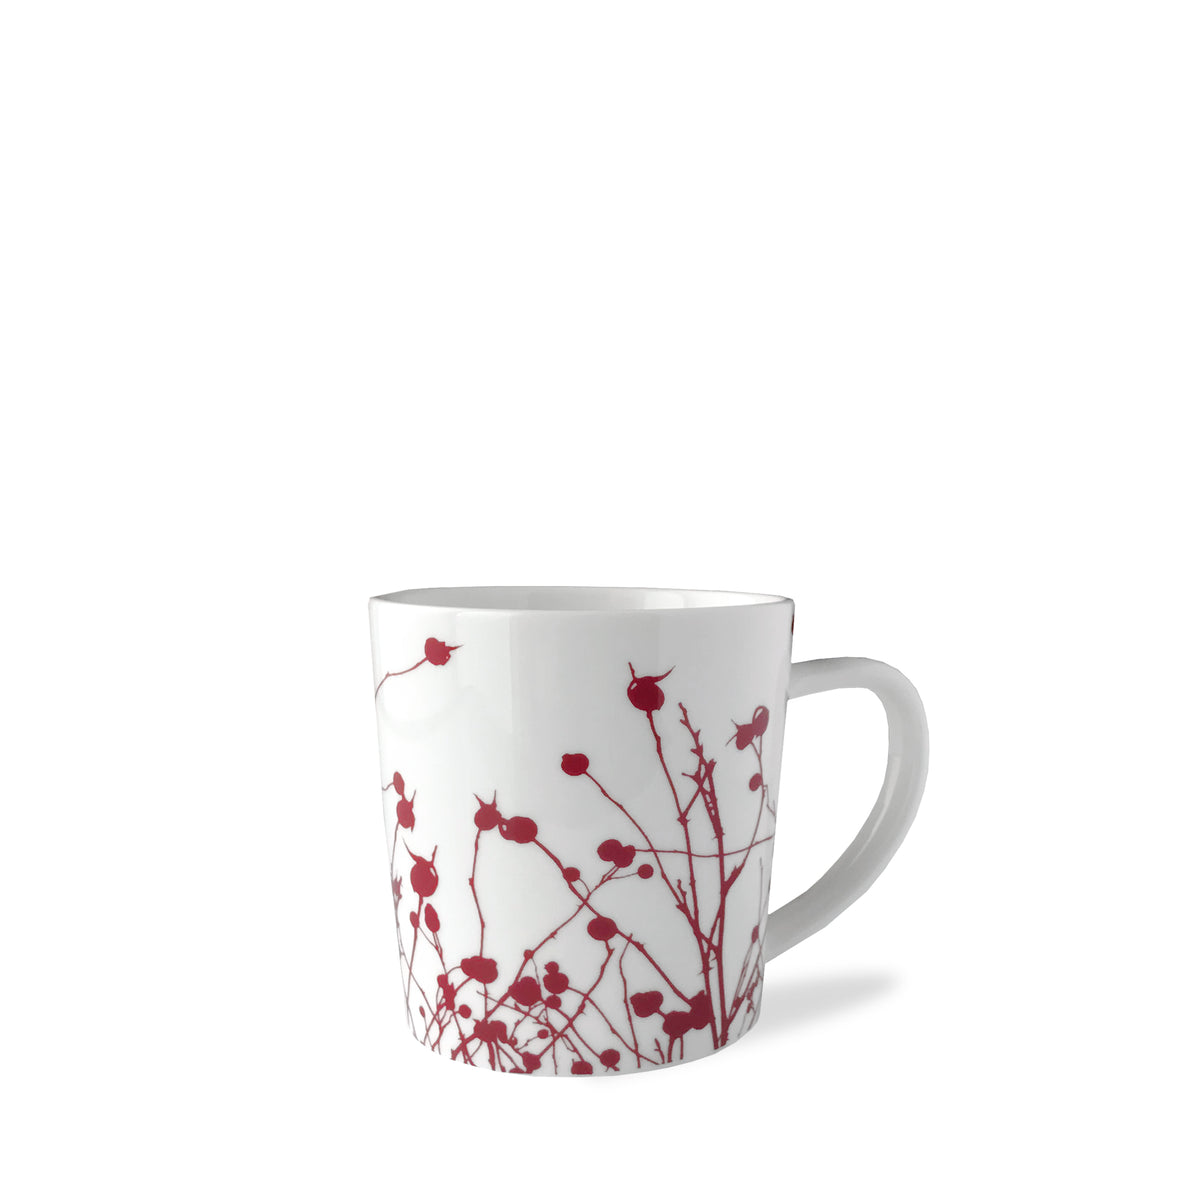 A generously sized, creamy white porcelain Winterberries Mug with a handle, featuring a red silhouette design of winter berries and branches by Caskata Artisanal Home.